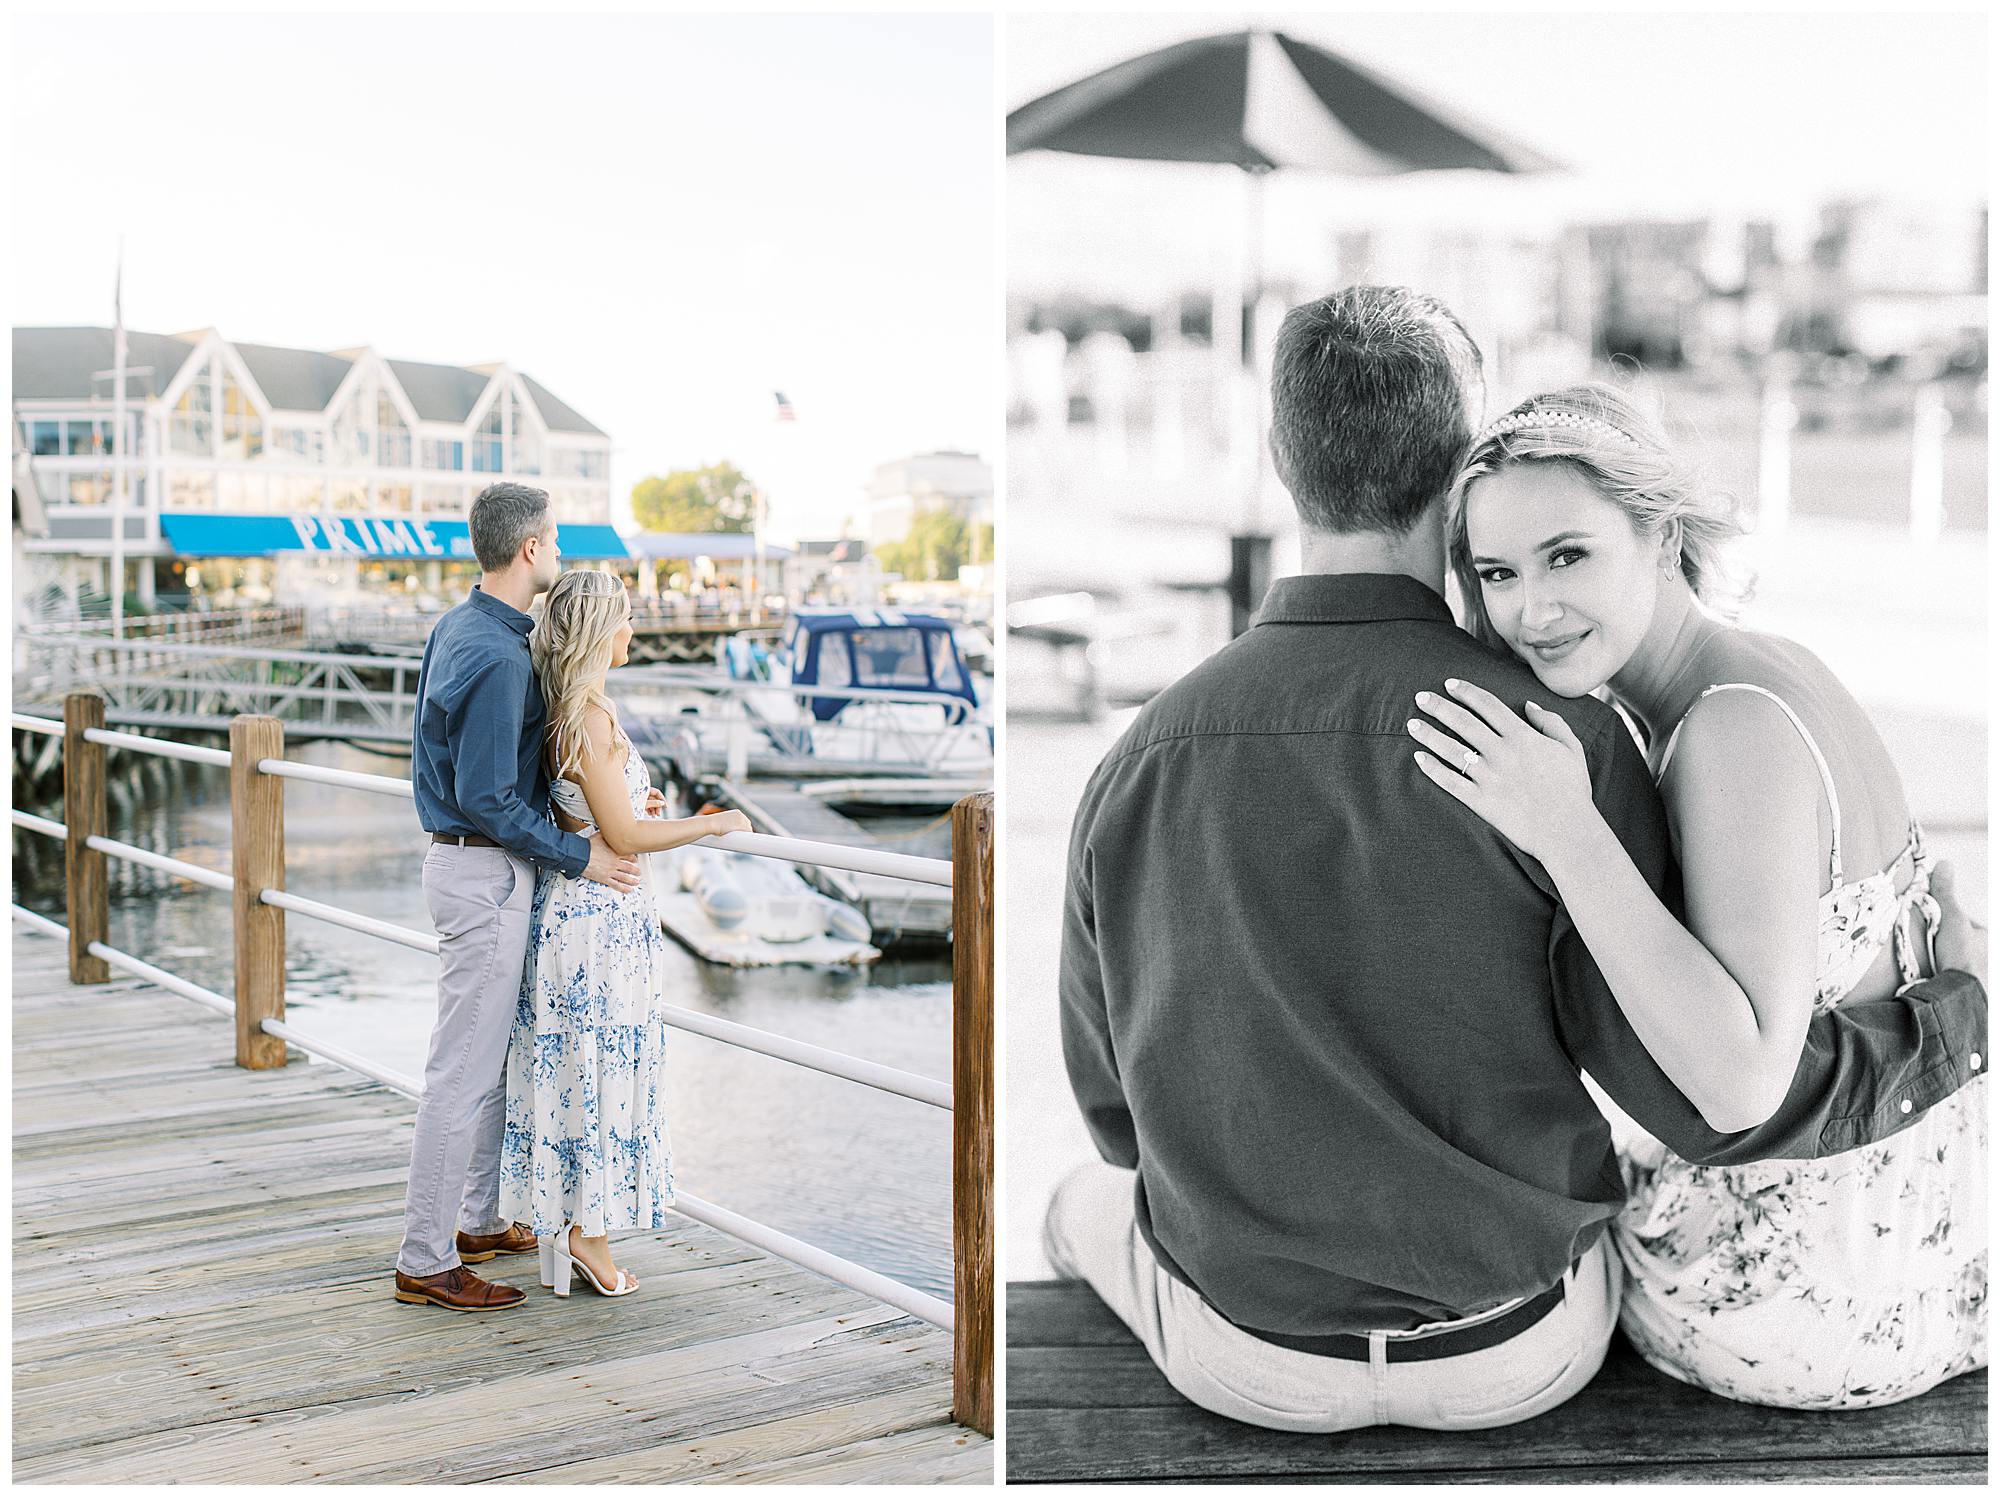 A Sunset Harbor Engagement in Connecticut